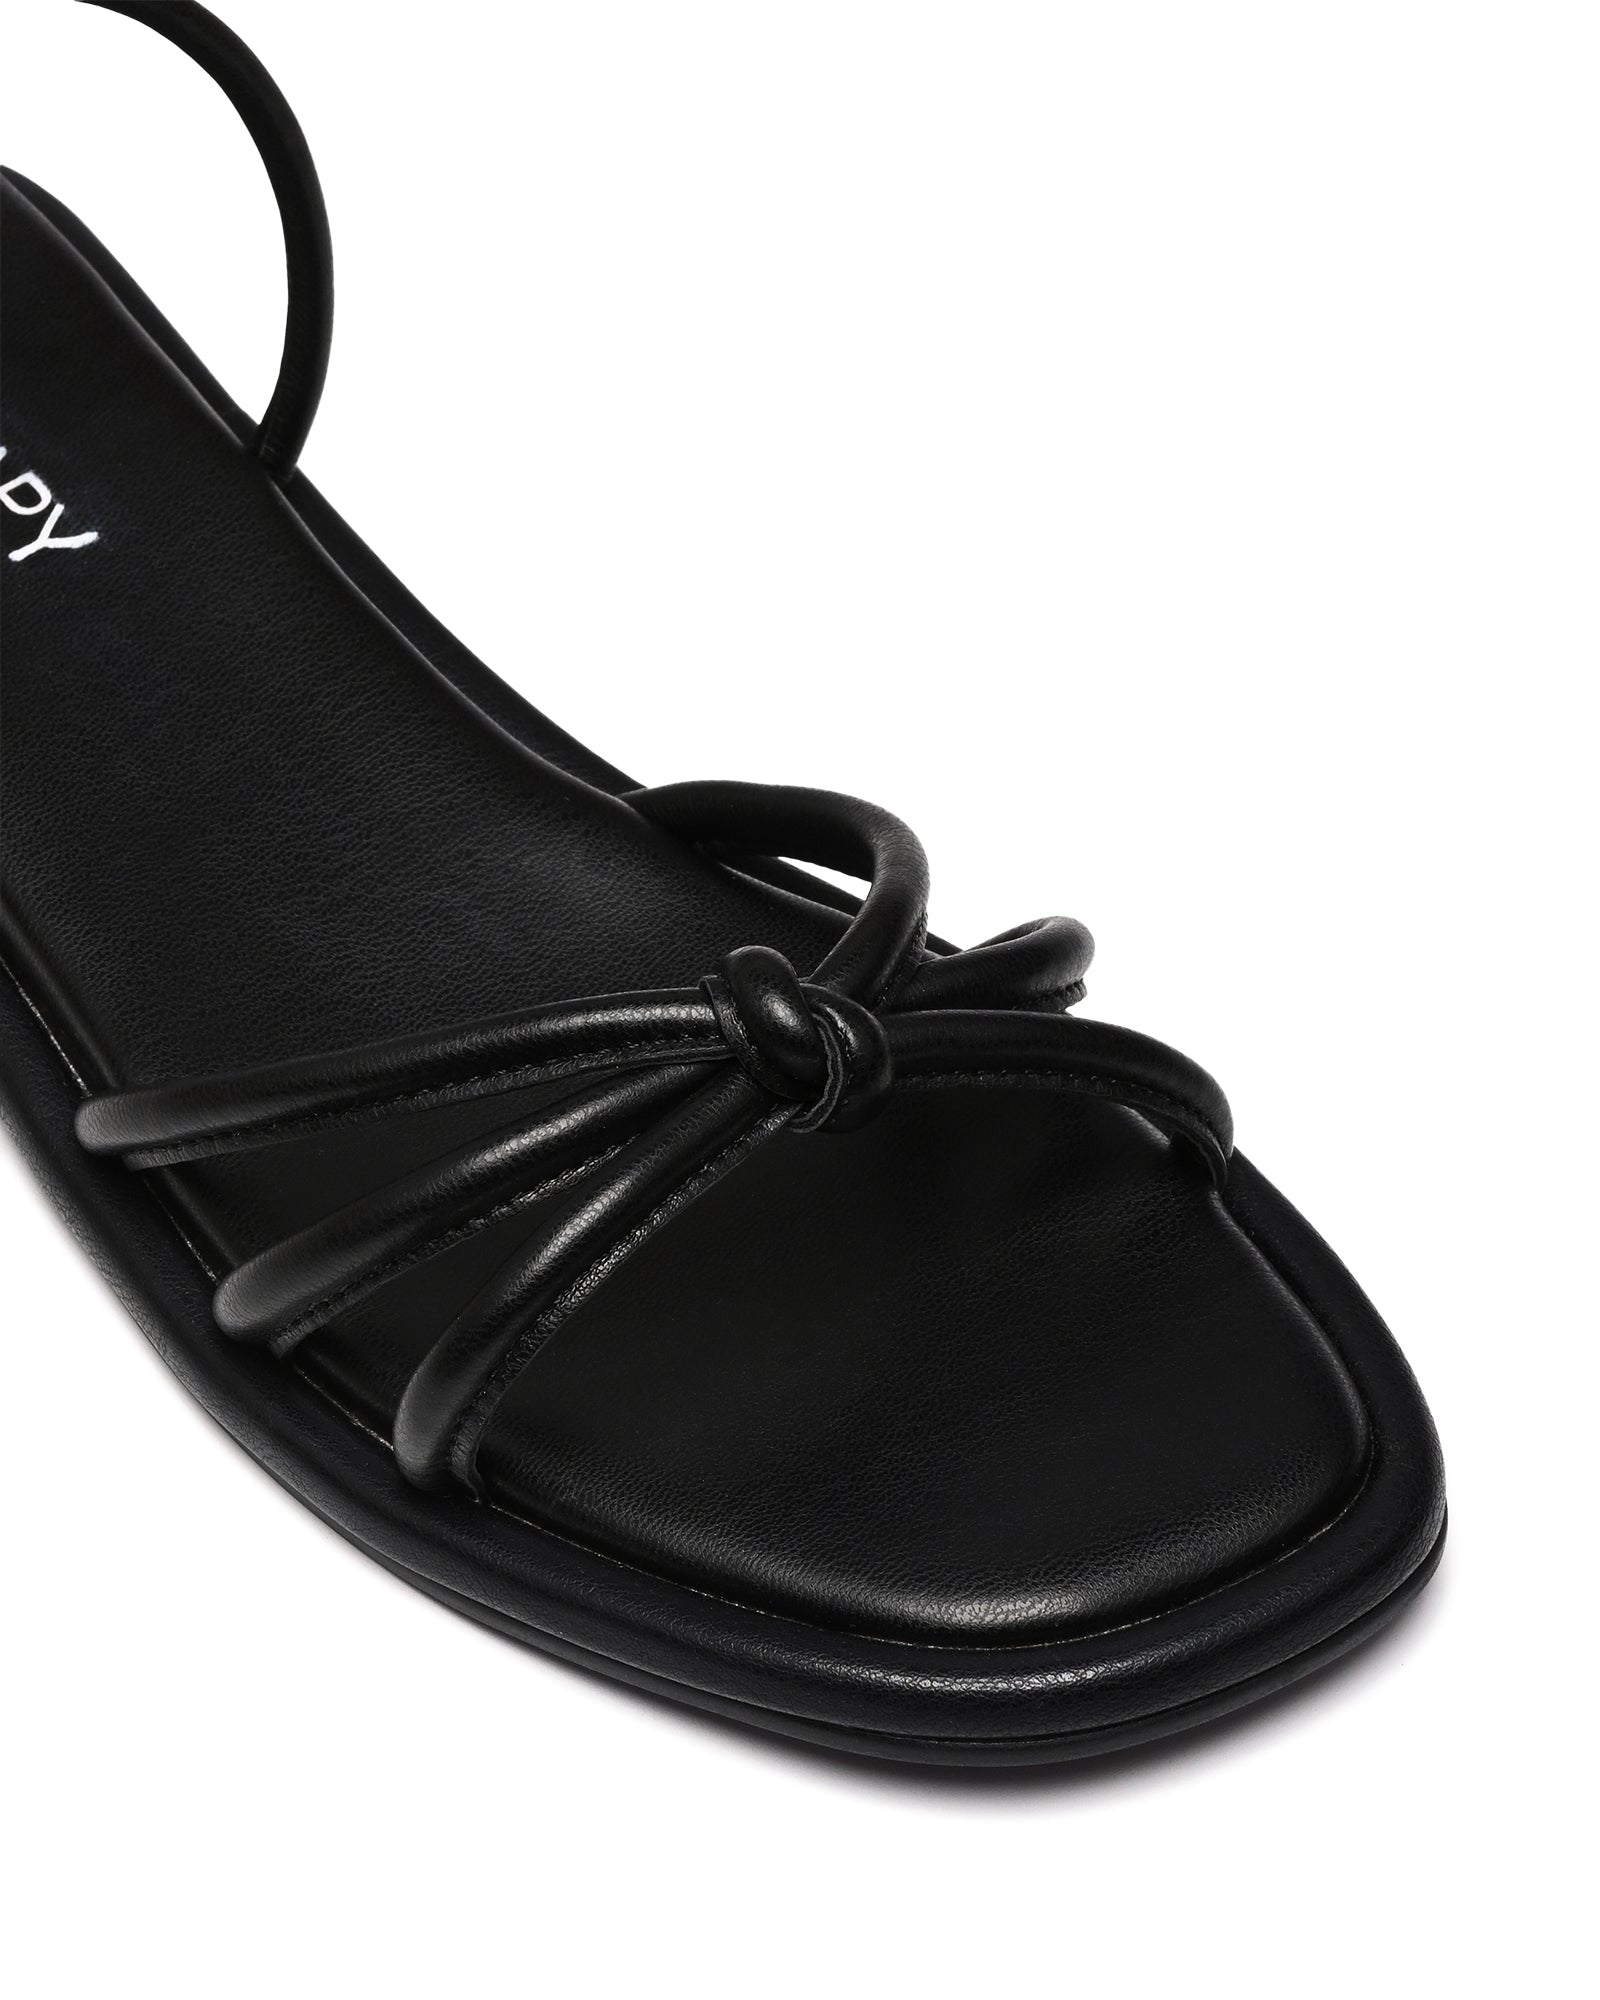 Therapy Shoes Raye Black Smooth | Women's Sandals | Flats | Tie Up